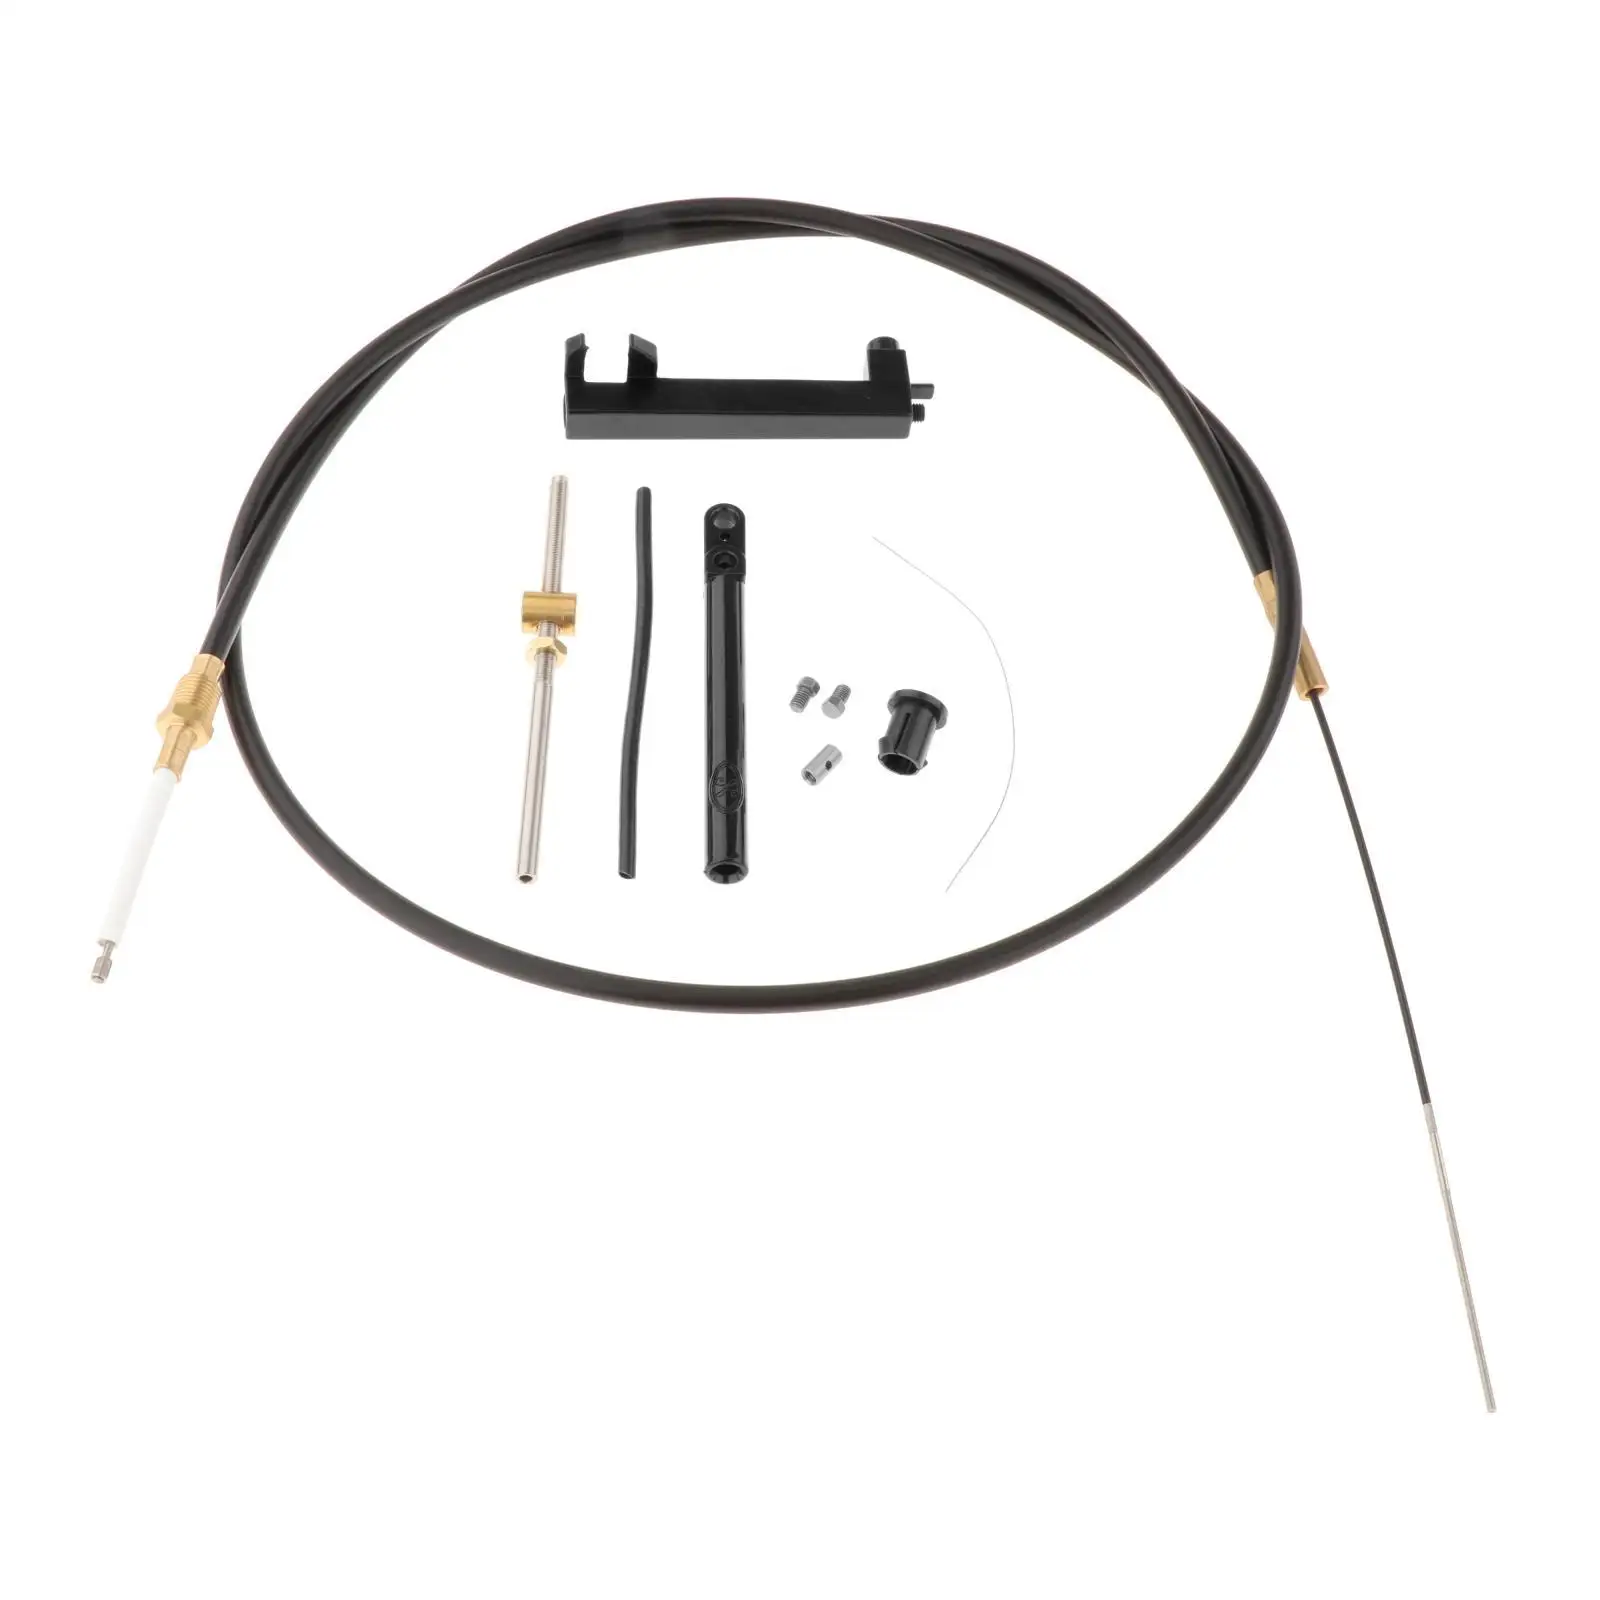 865436A02 Replacement Lower Shift Cable Assembly Kit for